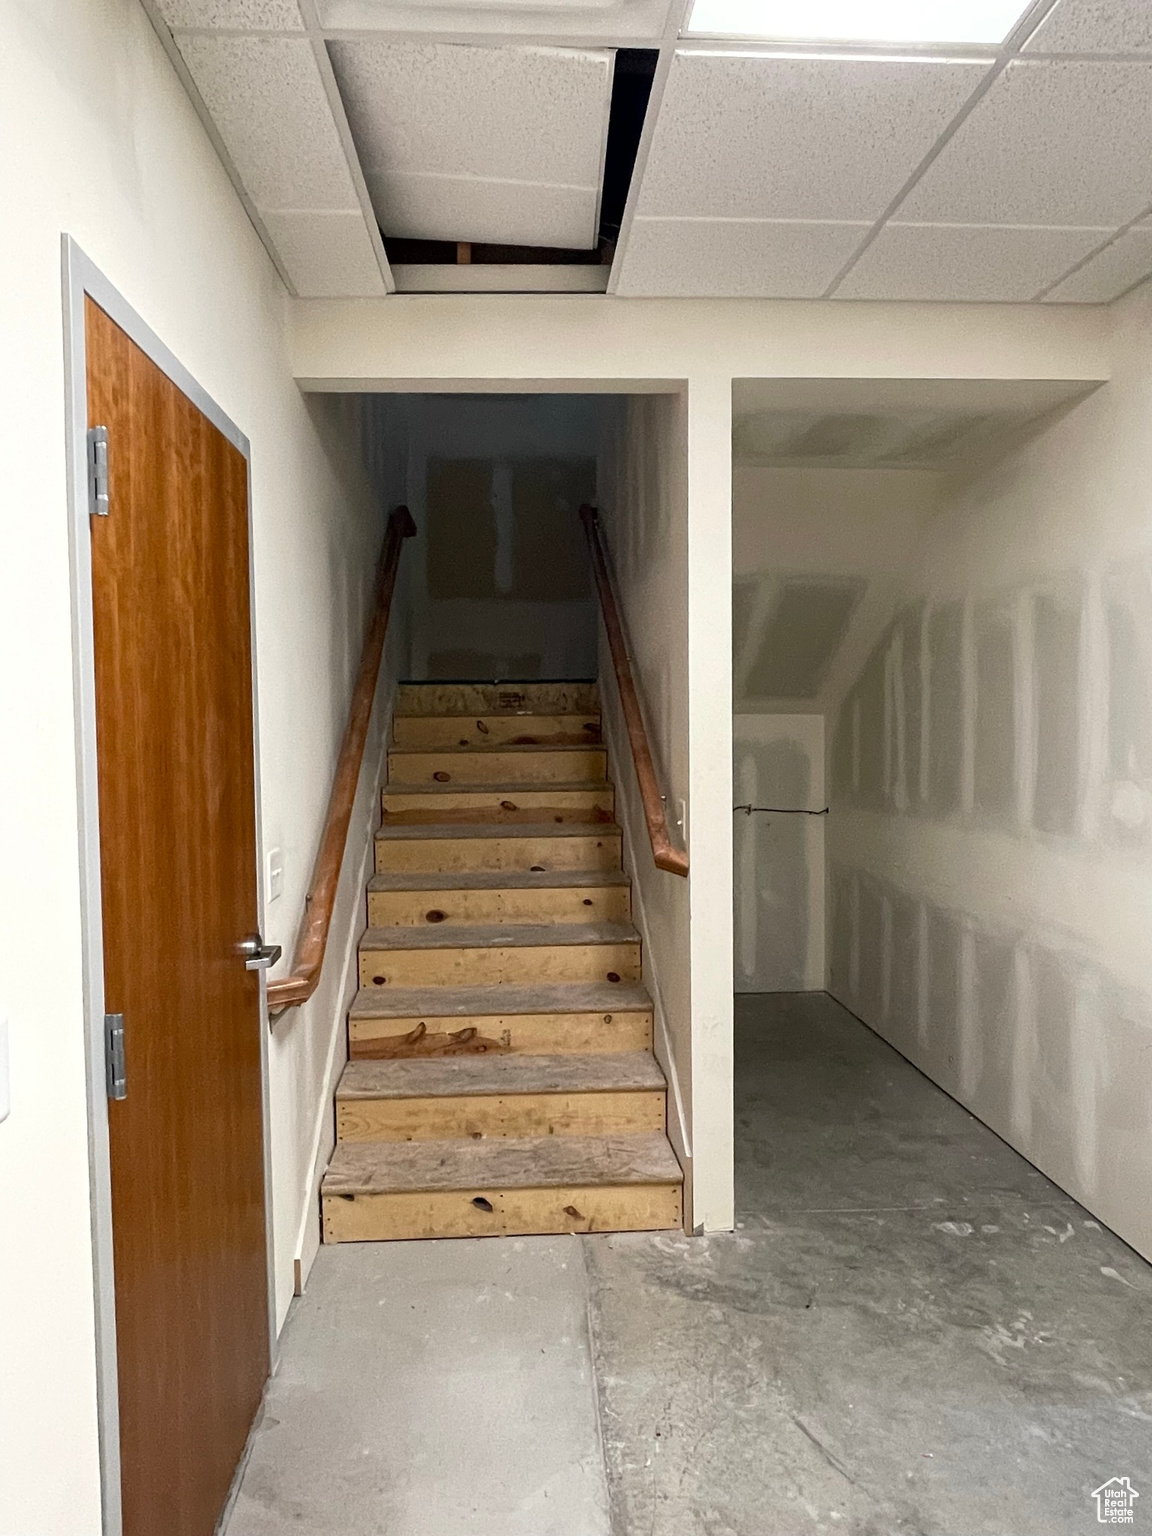 Stairs with a drop ceiling and concrete floors